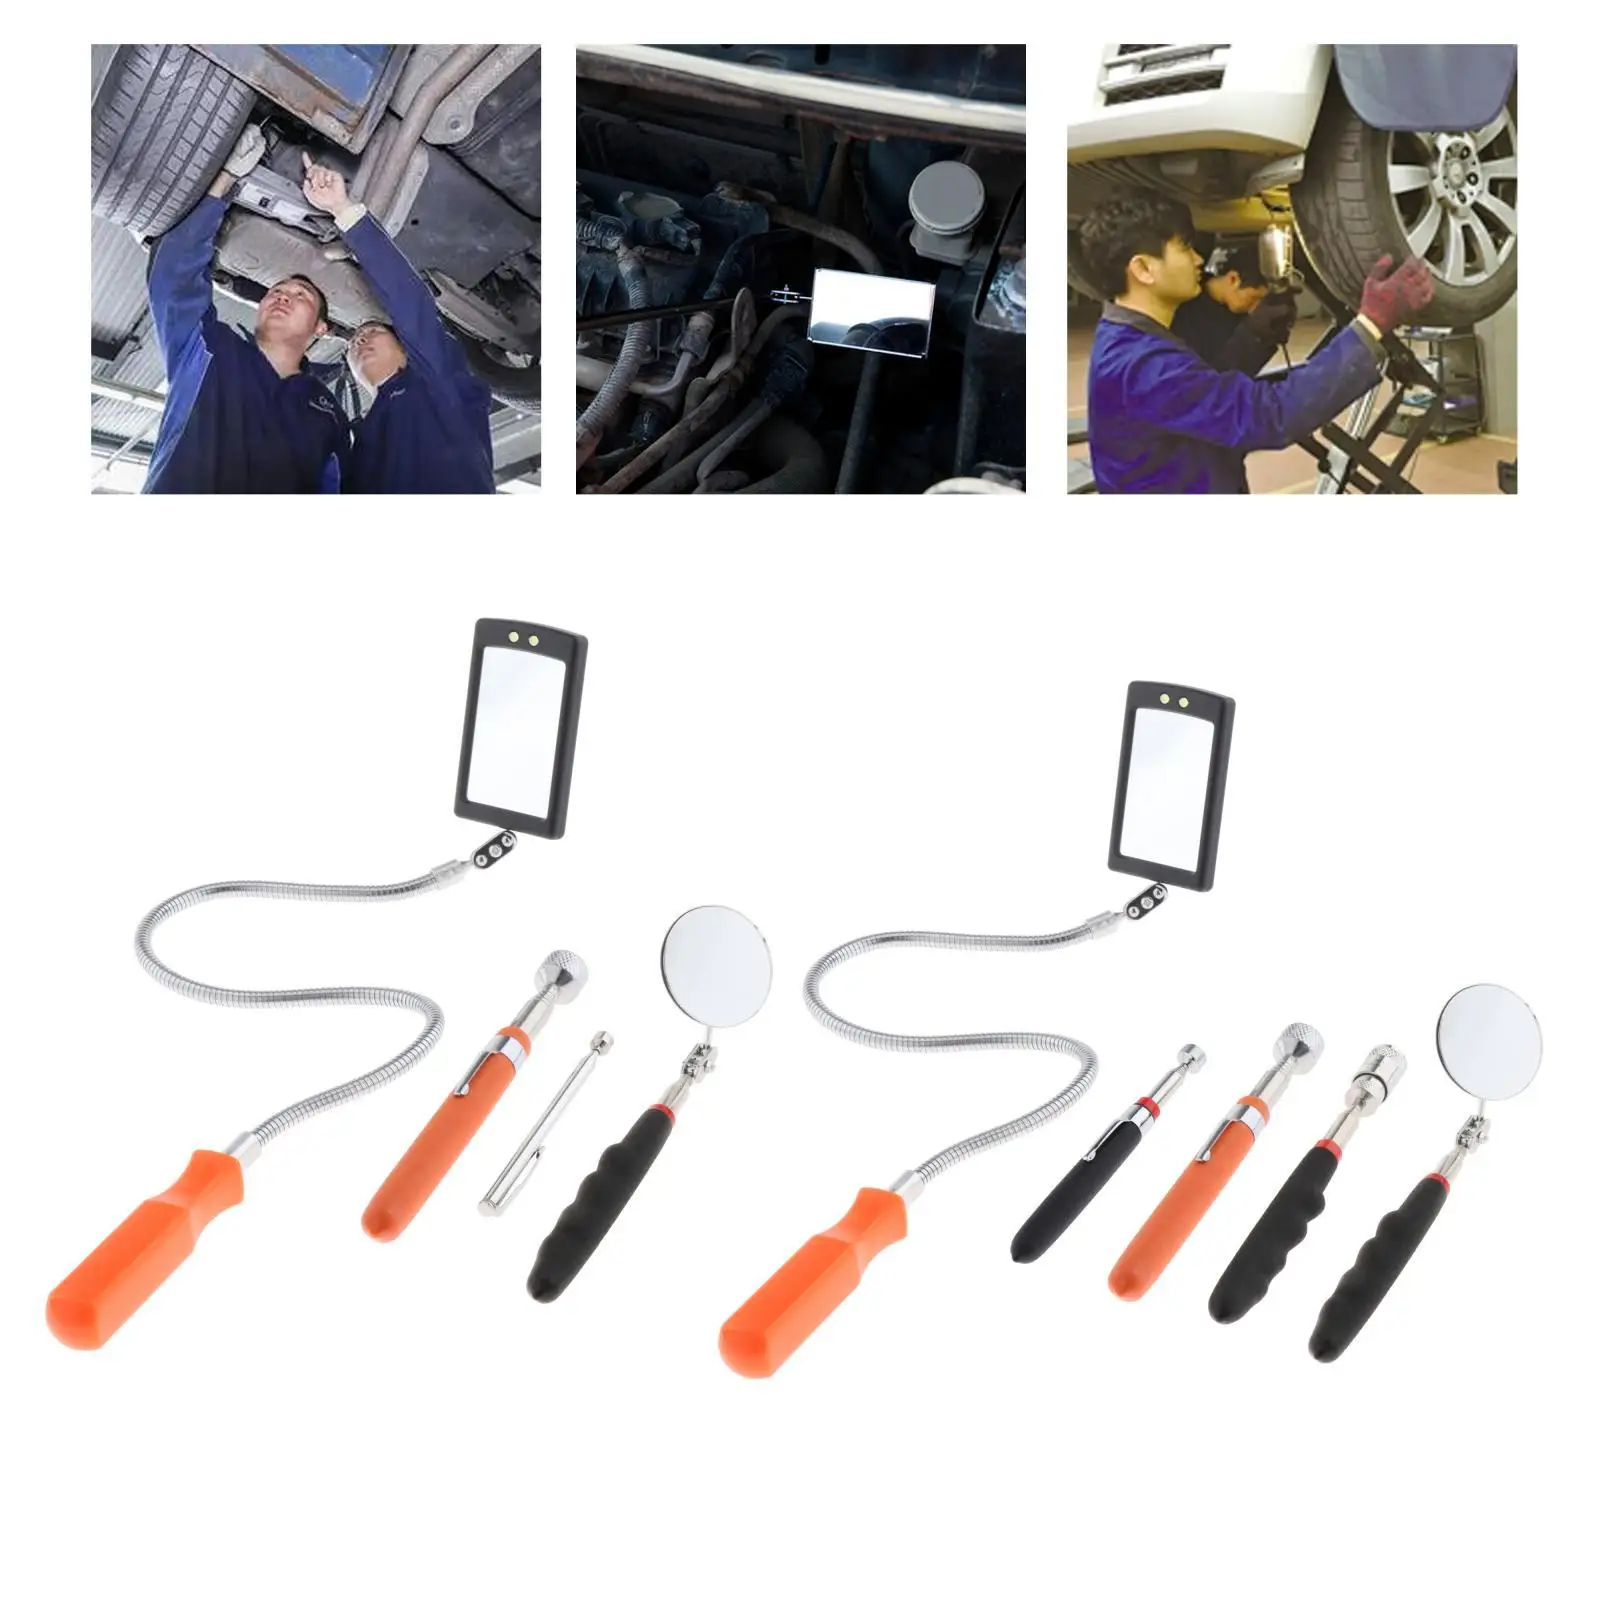 Magnetic Telescoping  Kit with Magnetic Suction  Repair Detector  Corners Finding Metal Nuts  Inspectors